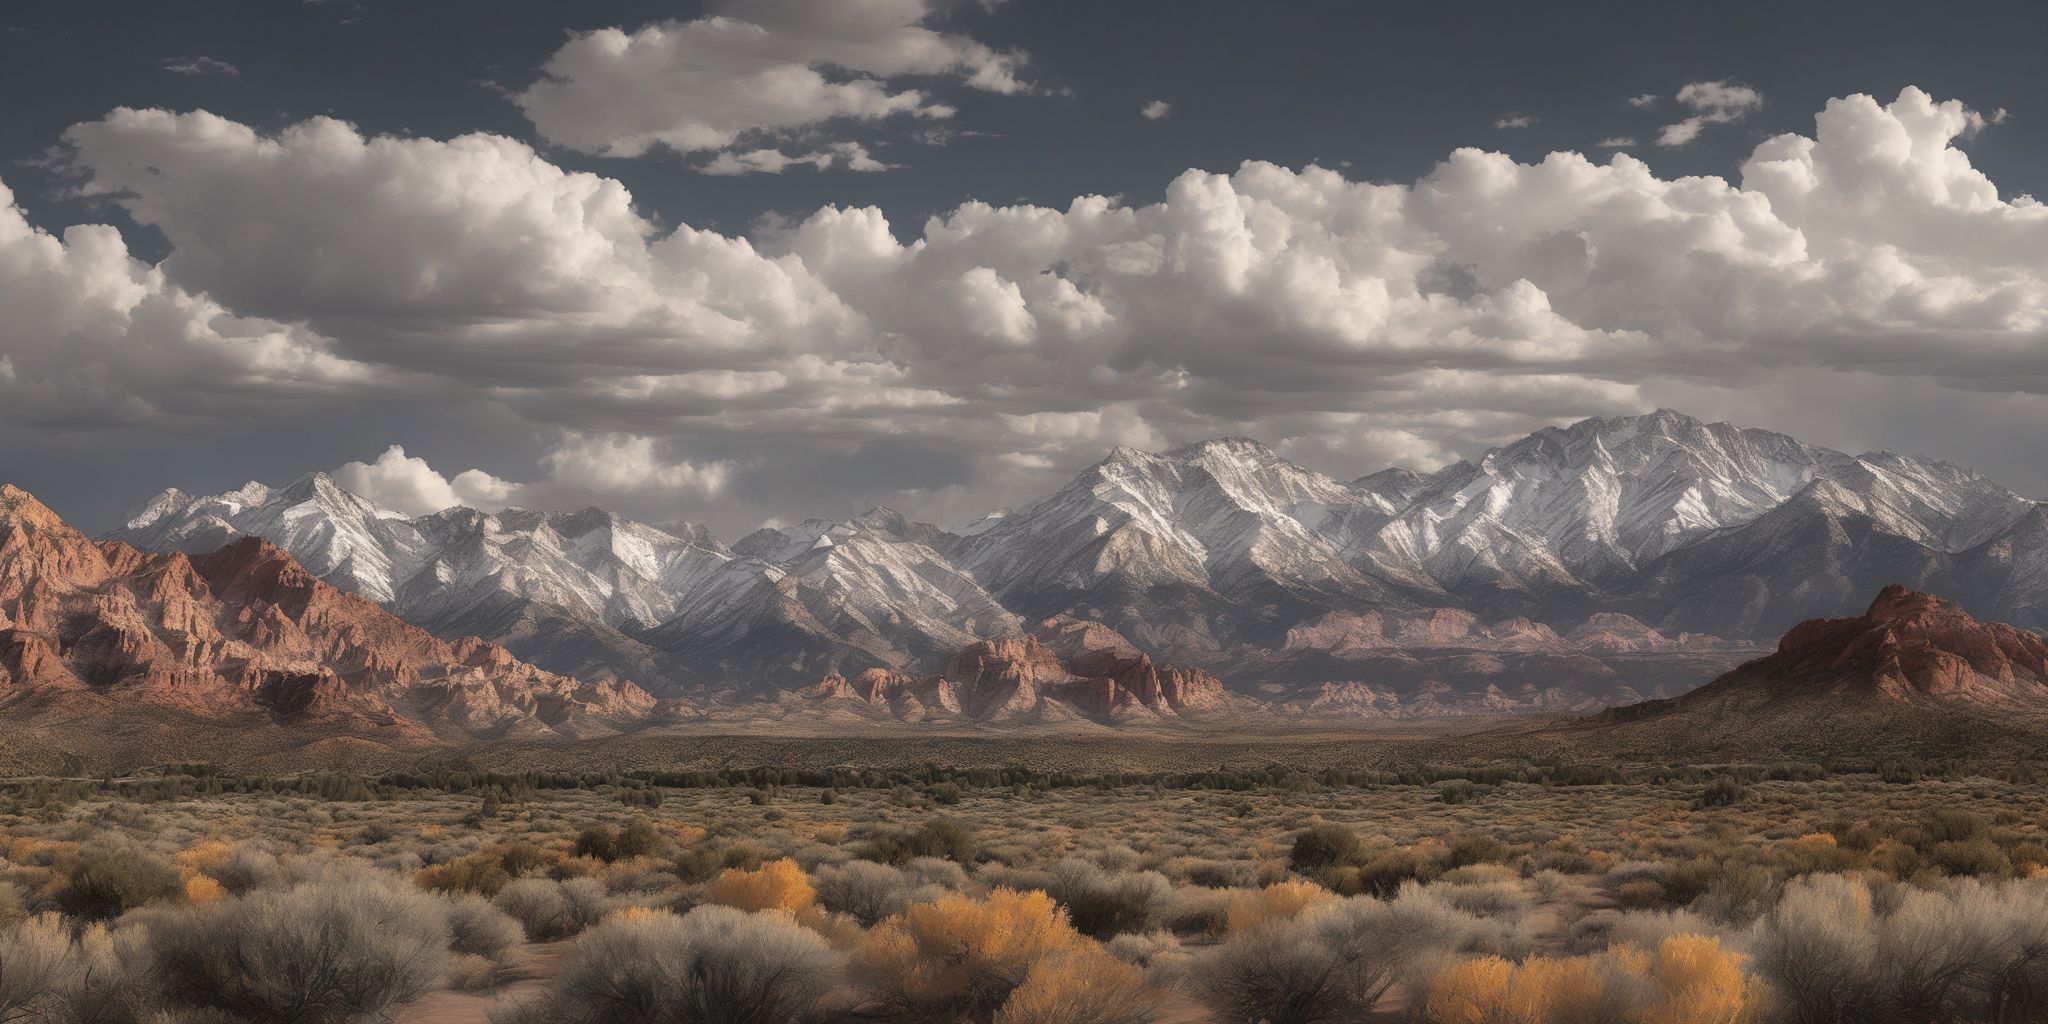 Utah mountains  in realistic, photographic style